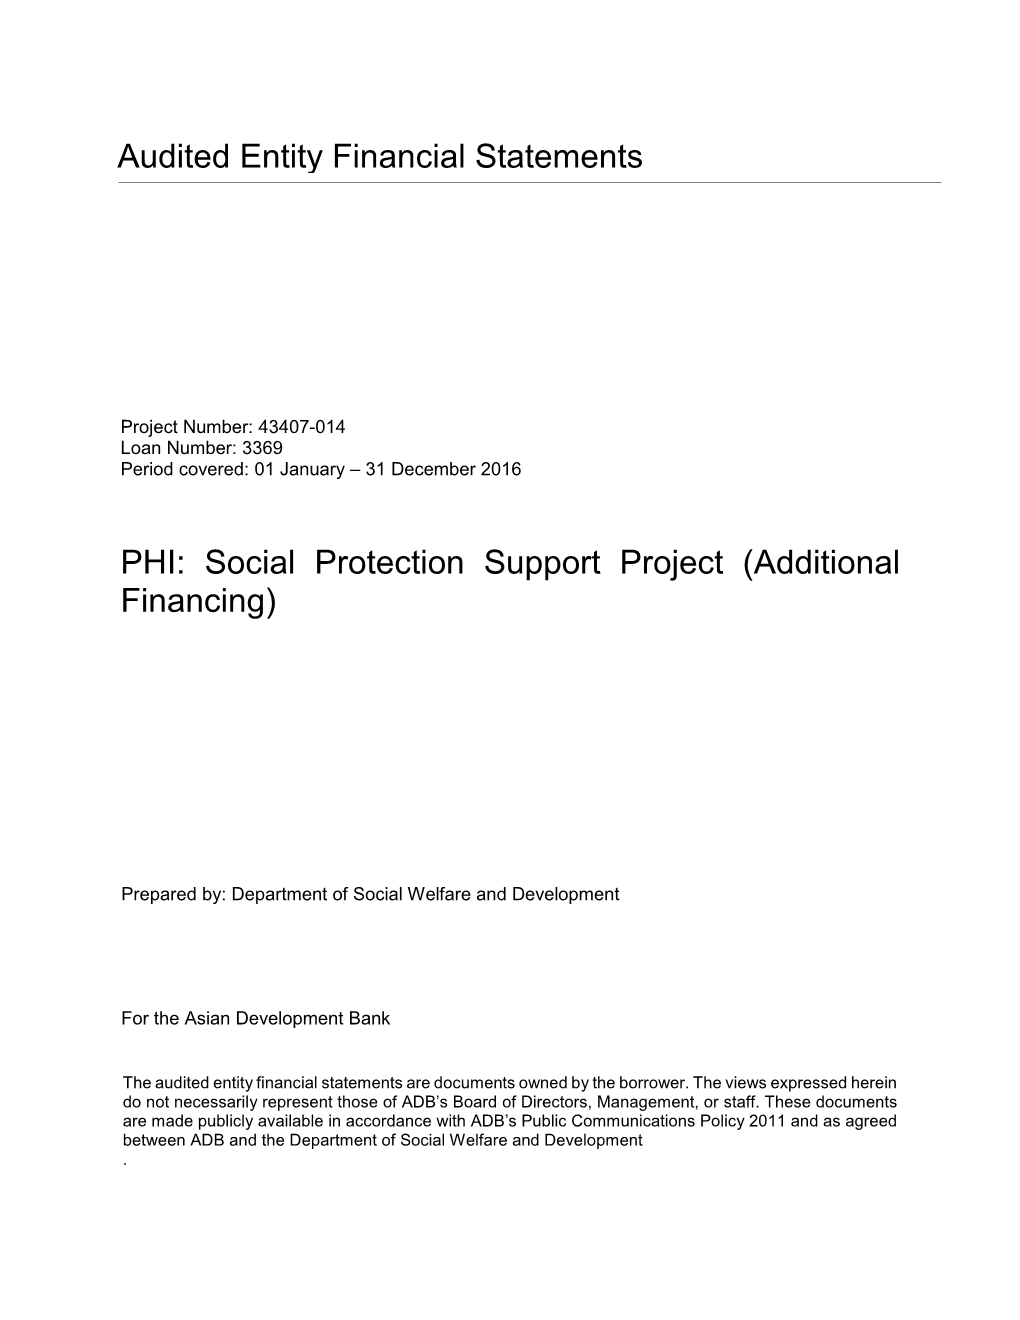 Audited Entity Financial Statements PHI: Social Protection Support Project